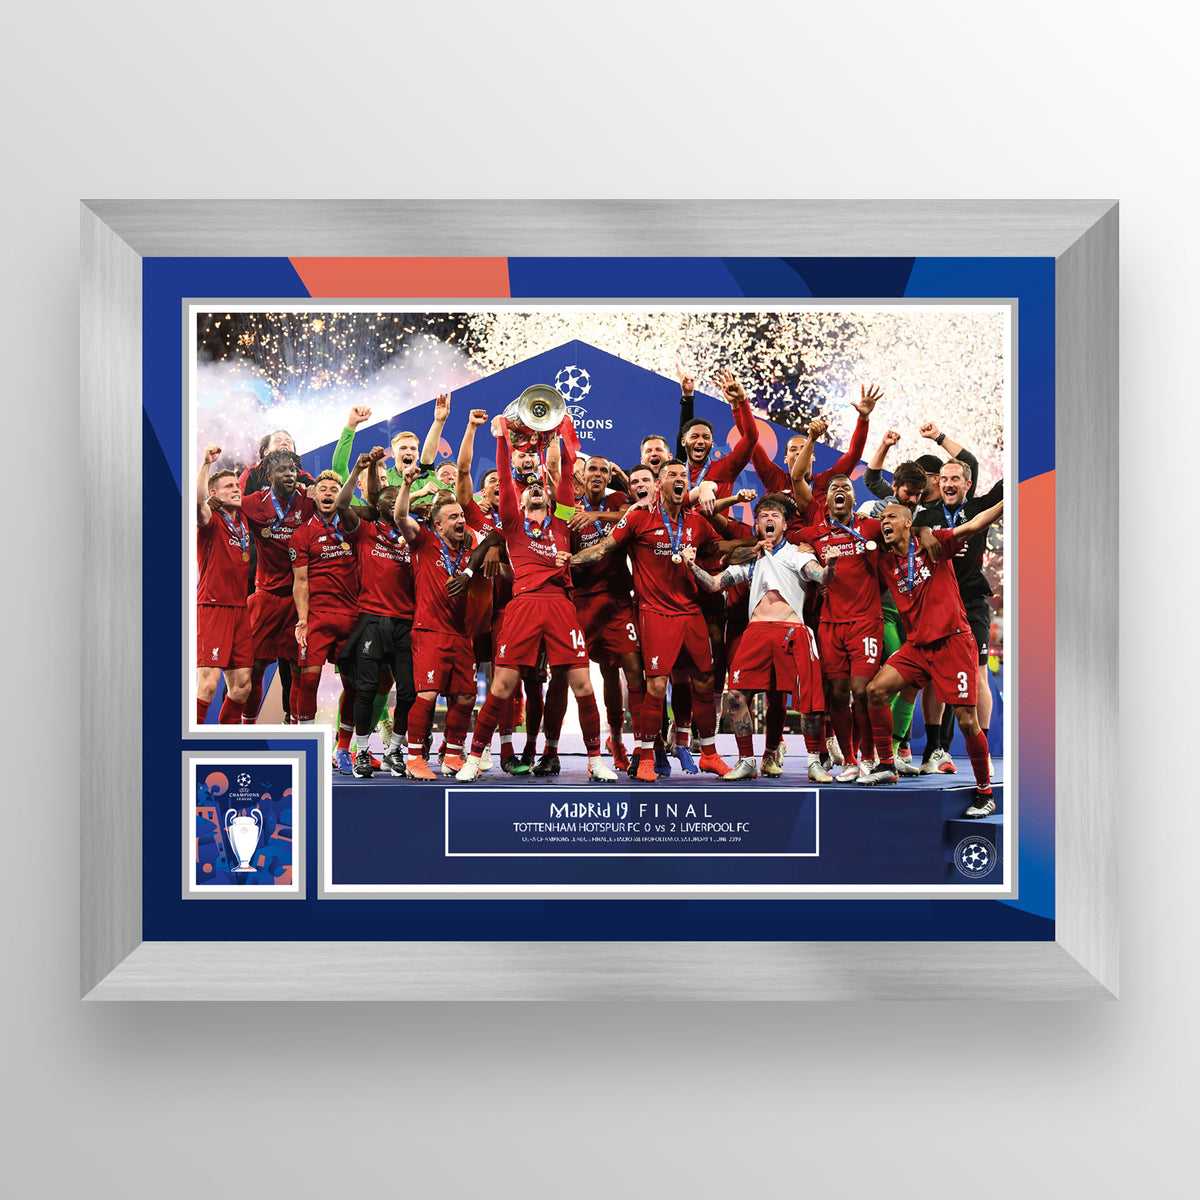 UEFA Champions League 2019 Final - Winner: Liverpool - Silver Frame UEFA Club Competitions Online Store